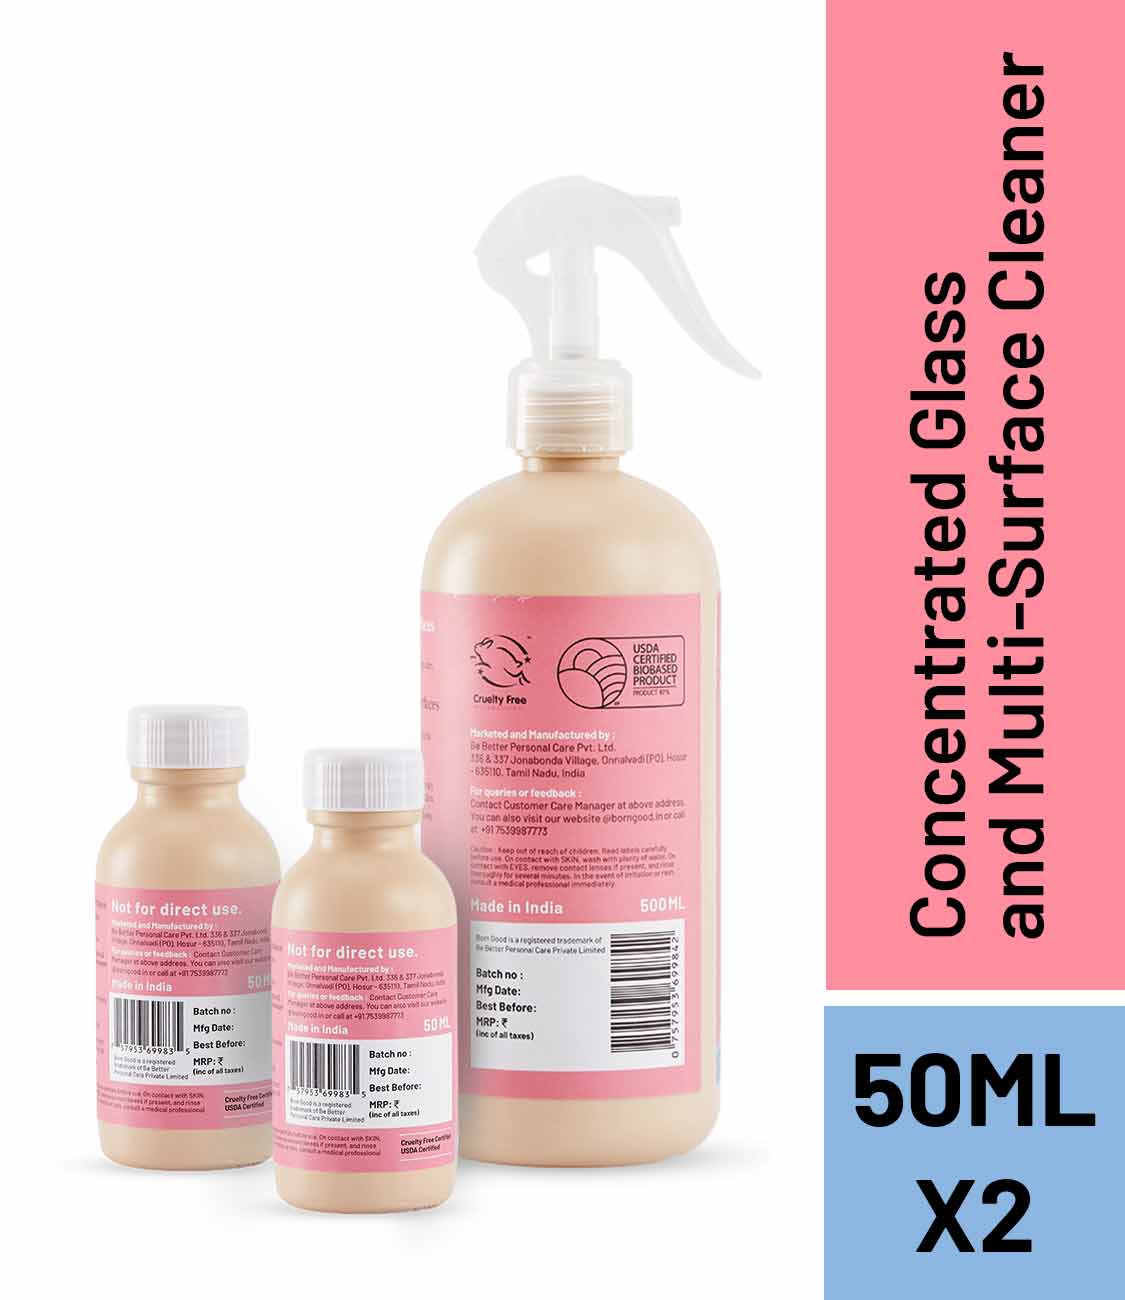 Born Good Plant-based Glass & Multi-Surface Cleaner Concentrate Kit (Makes 1 L)